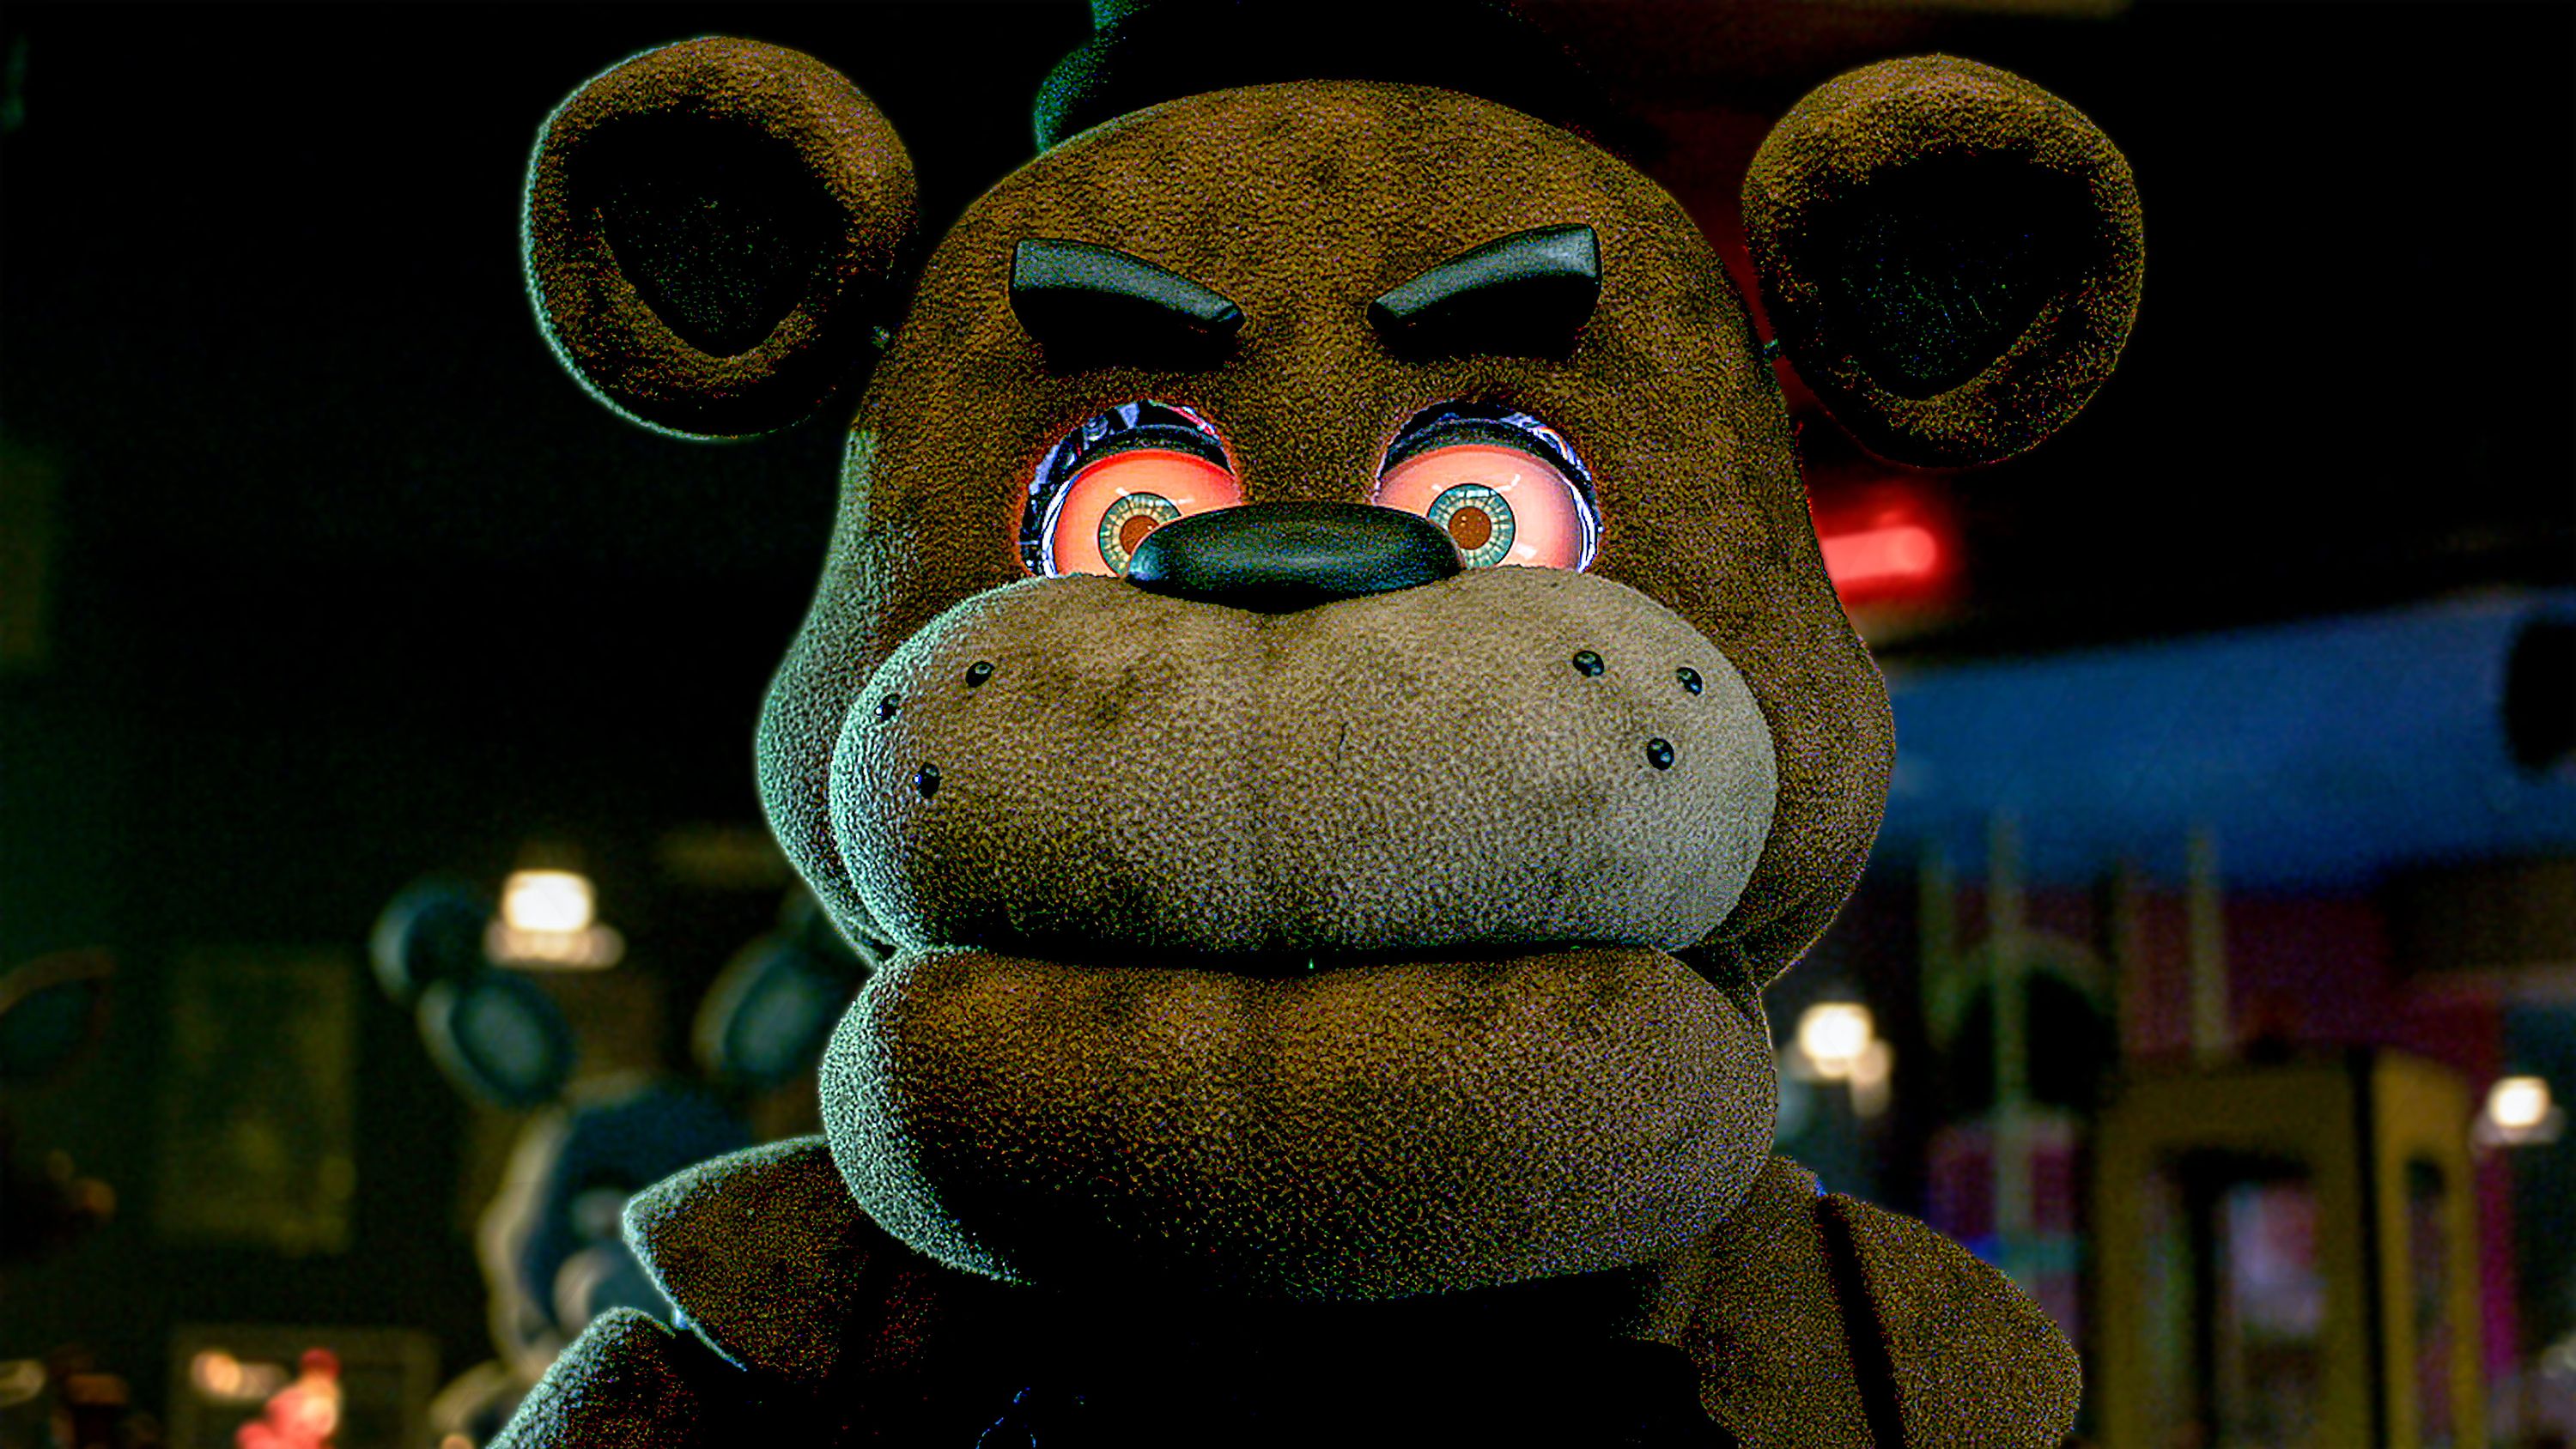 Five Nights At Freddy's 2' Is In The Works, Emma Tammi Returning